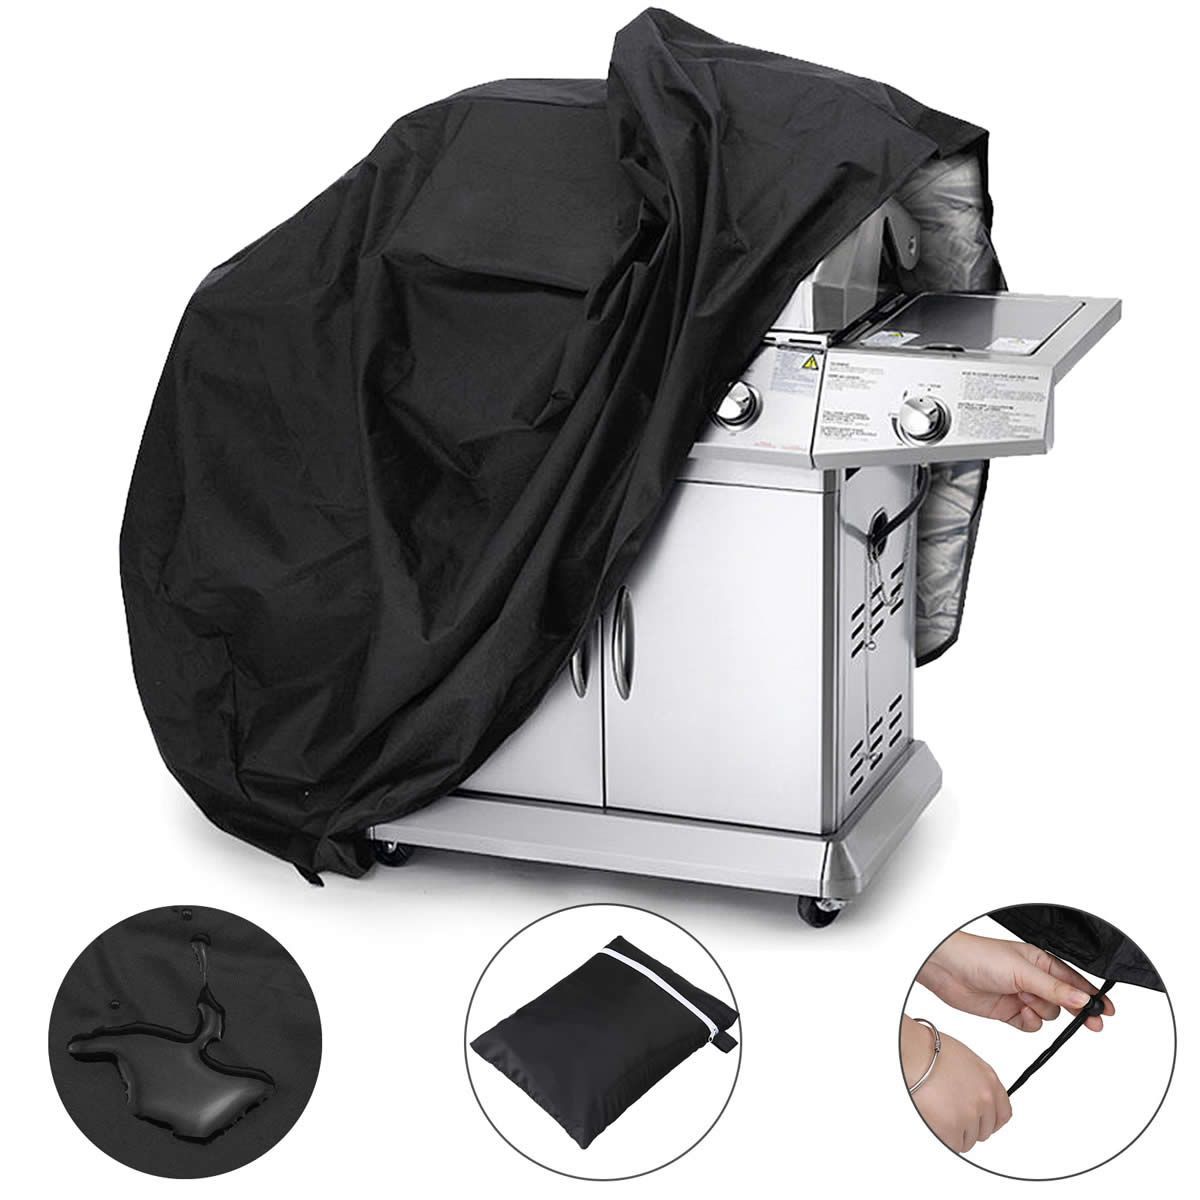 BBQ Grill Cover 2 Burner Waterproof Outdoor Charcoal Gas Barbecue Protector 145cm